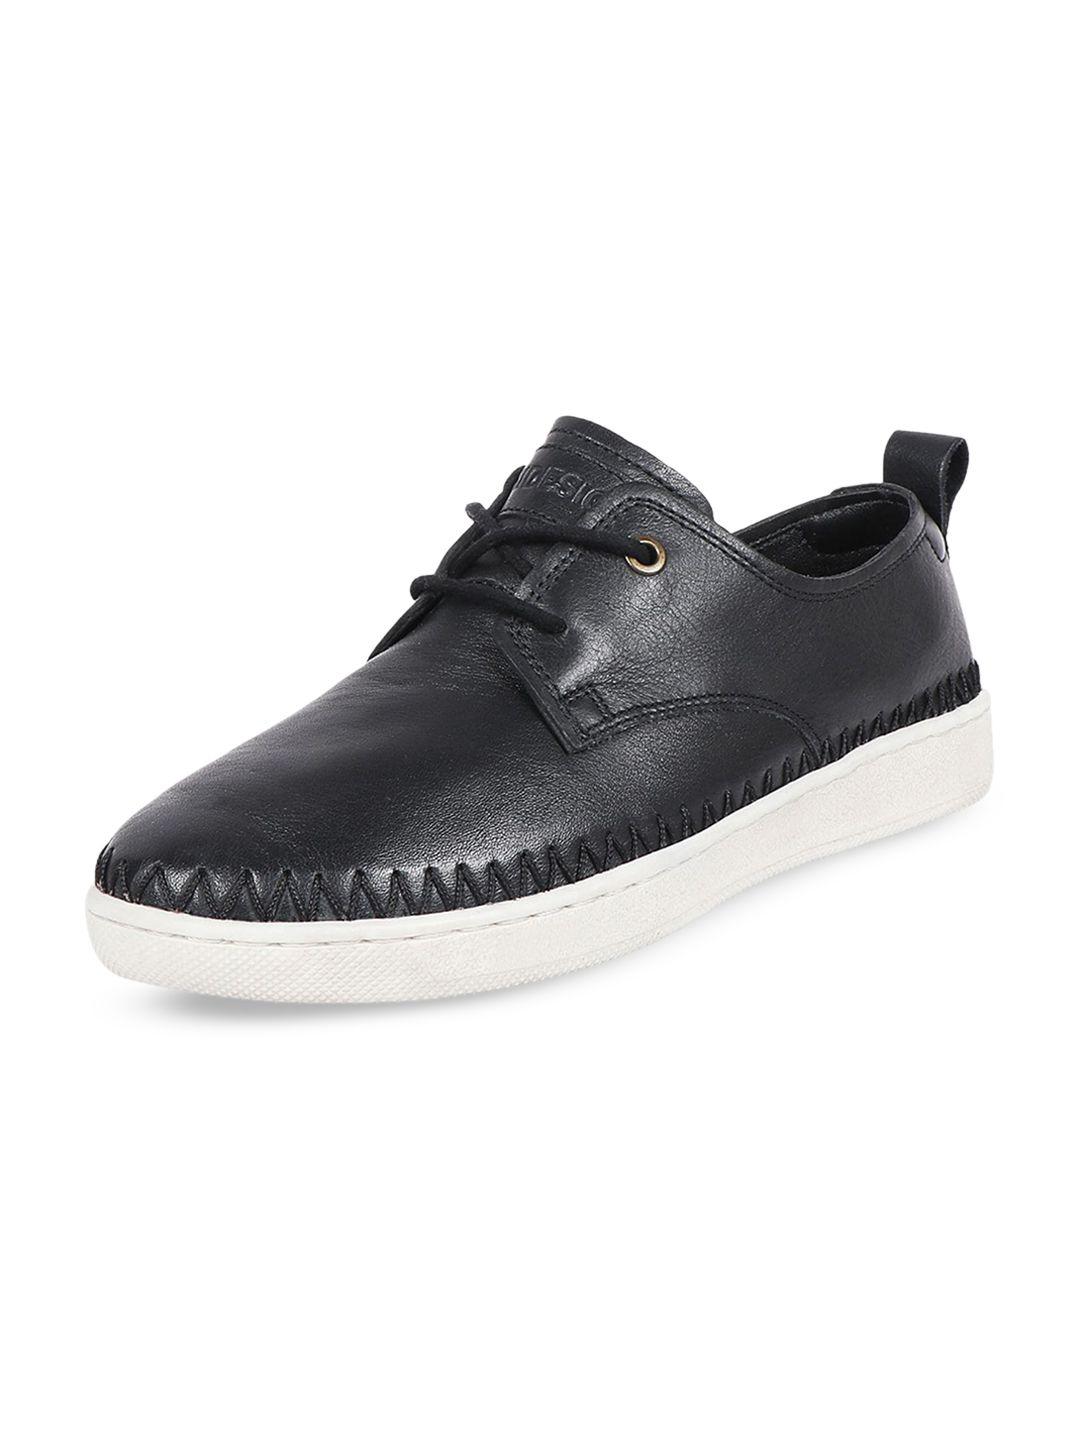 hidesign-women-andes-leather-comfort-insole-contrast-sole-sneakers